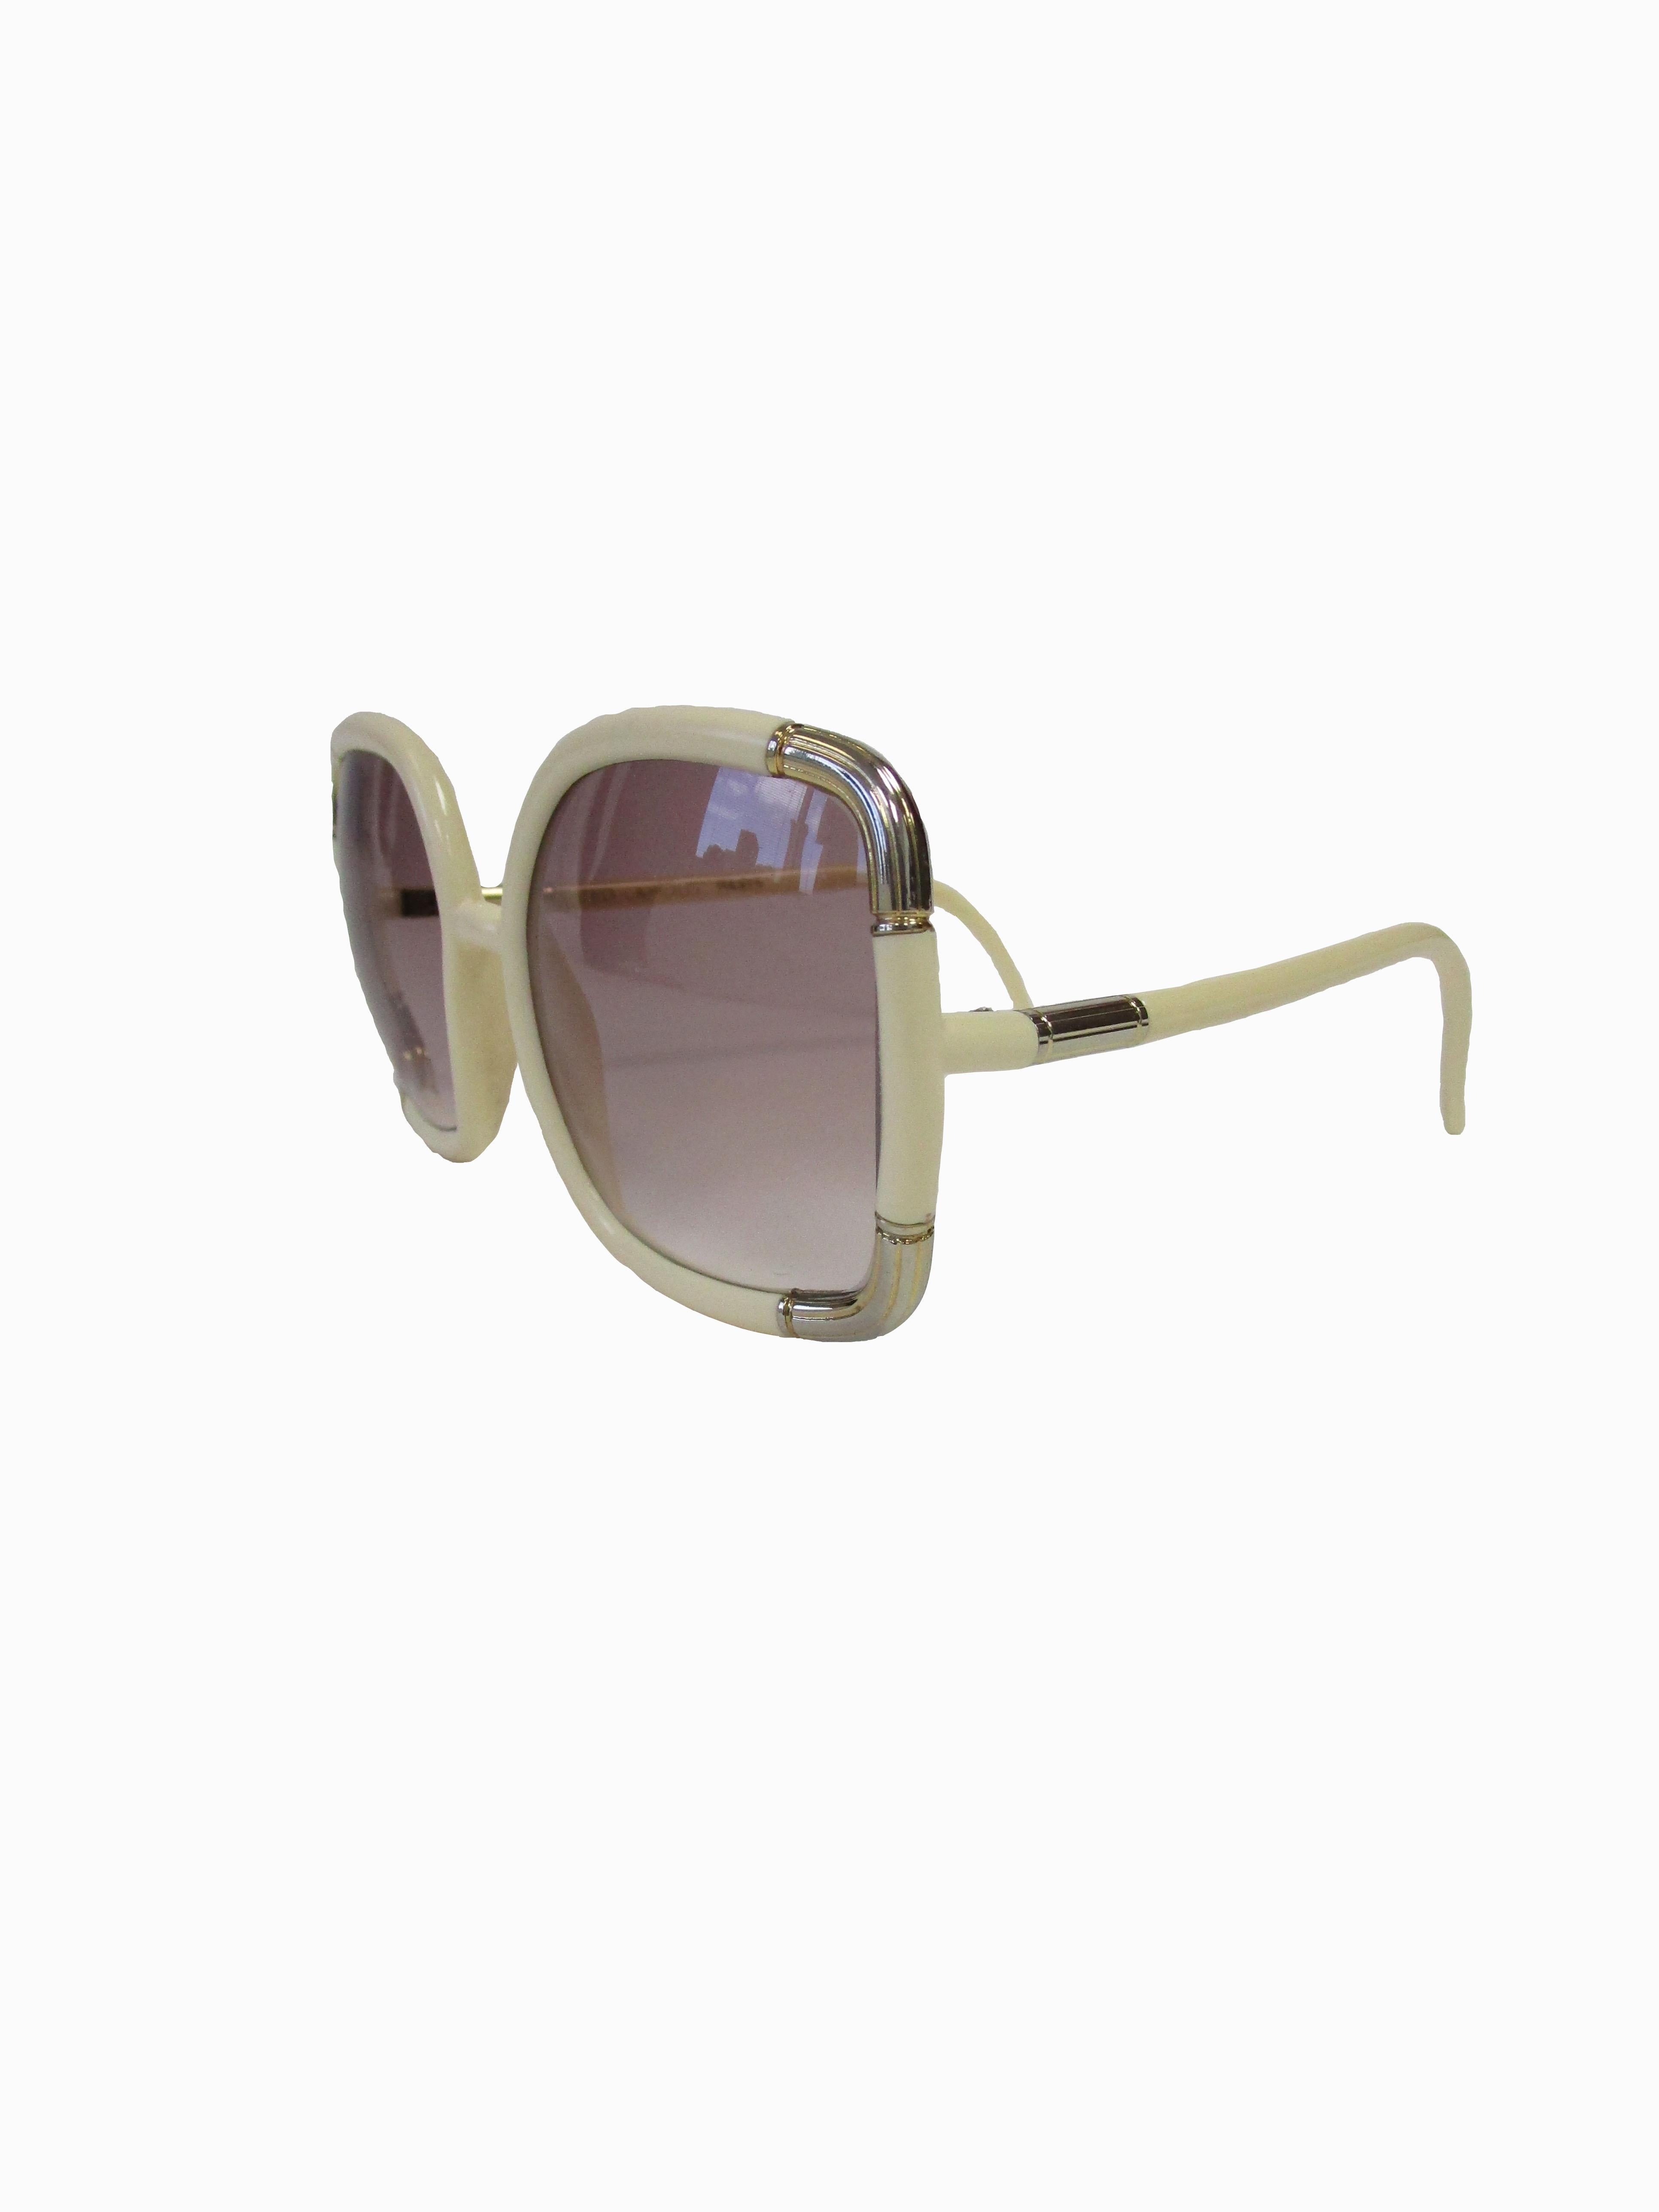 
Classic Ted Lapidus sunglasses featuring ivory frames with gold accents and dusky pink lenses

Lens Width-57mm
Bridge Width- 15mm
Temple (arm) Length - 149mm